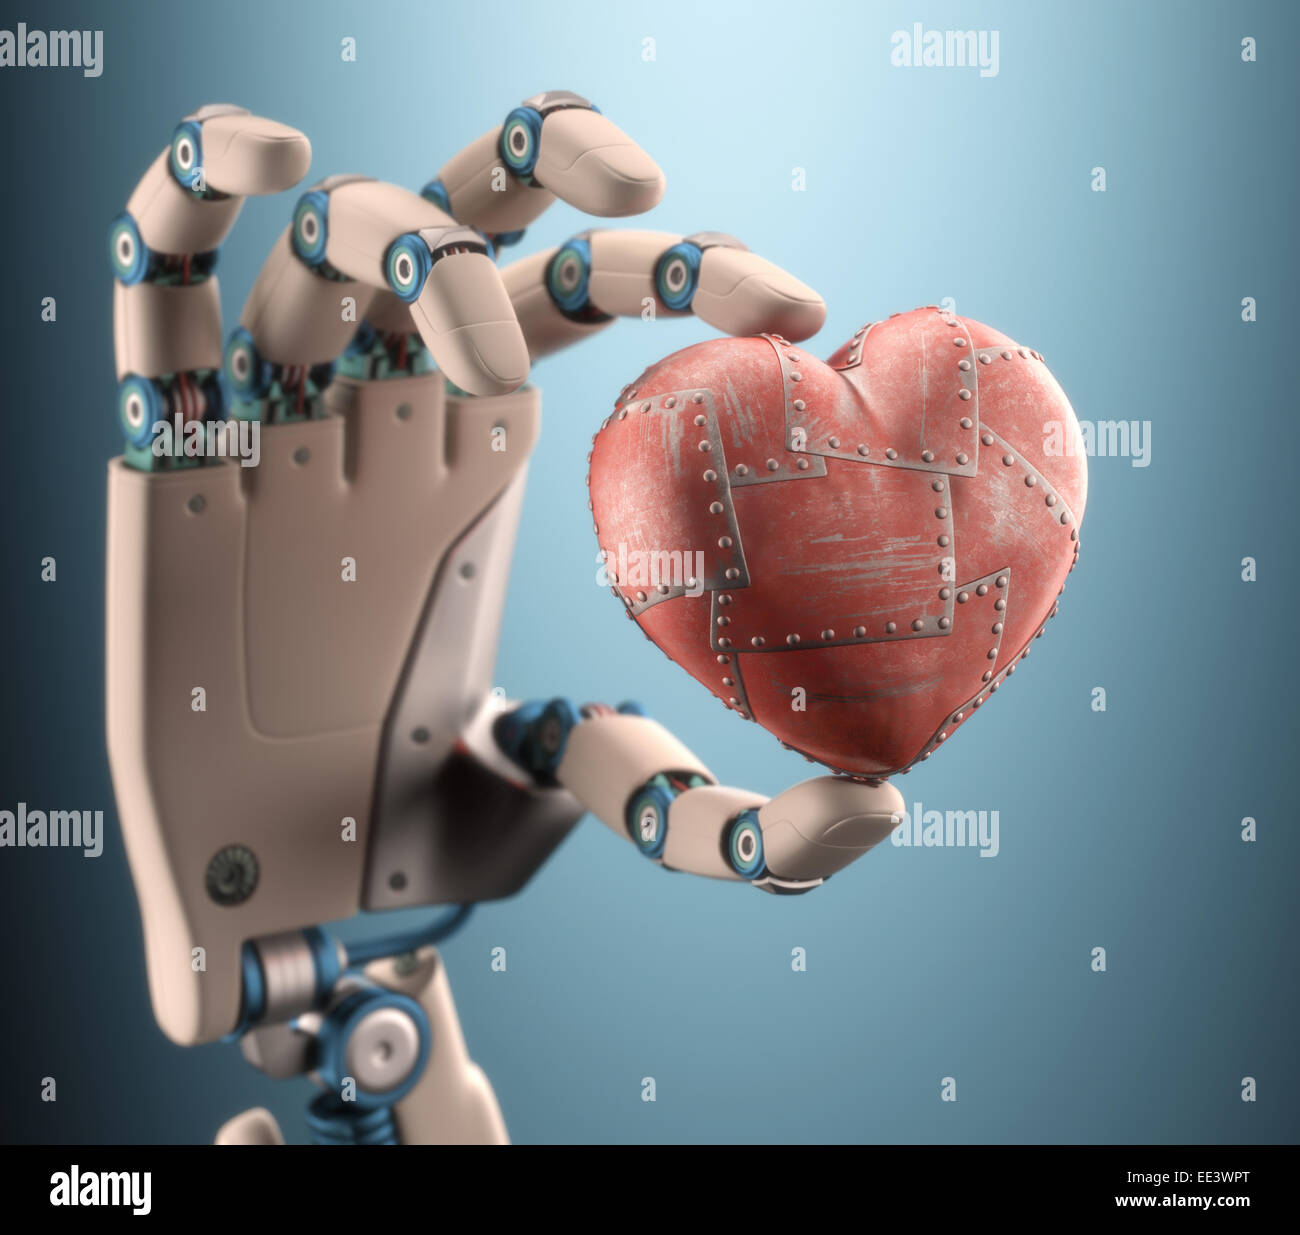 Robot hand holding a metal heart. Clipping path included. Stock Photo